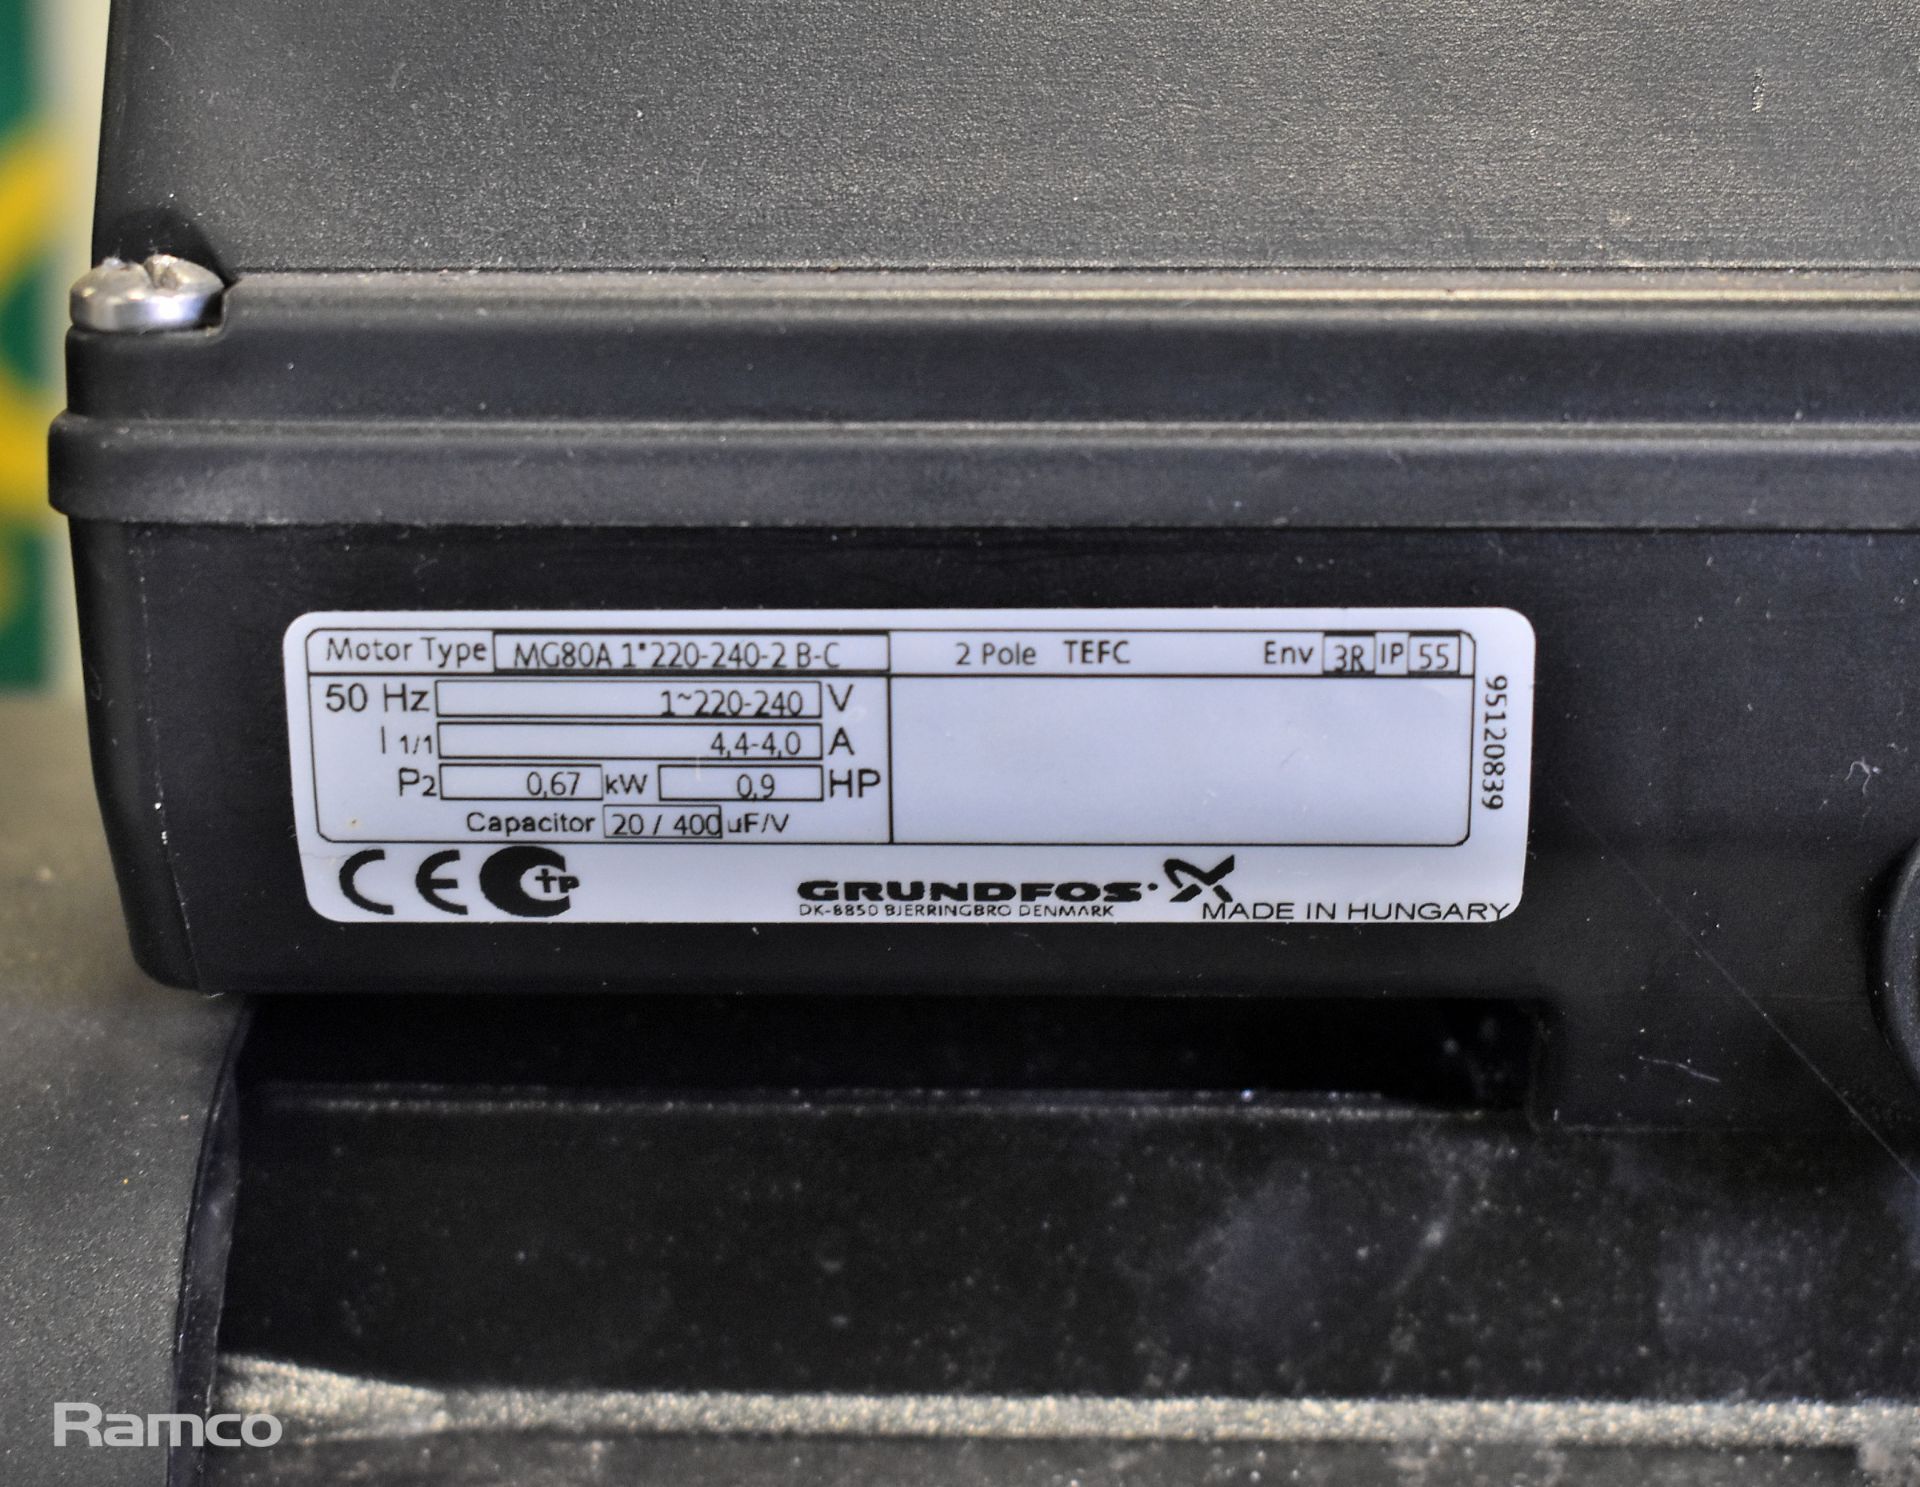 Grundfos JP 5 A-A-CVBP Horizontal Multi-stage Pump with Grundfos X PM 2 AD pressure manager - Image 4 of 9